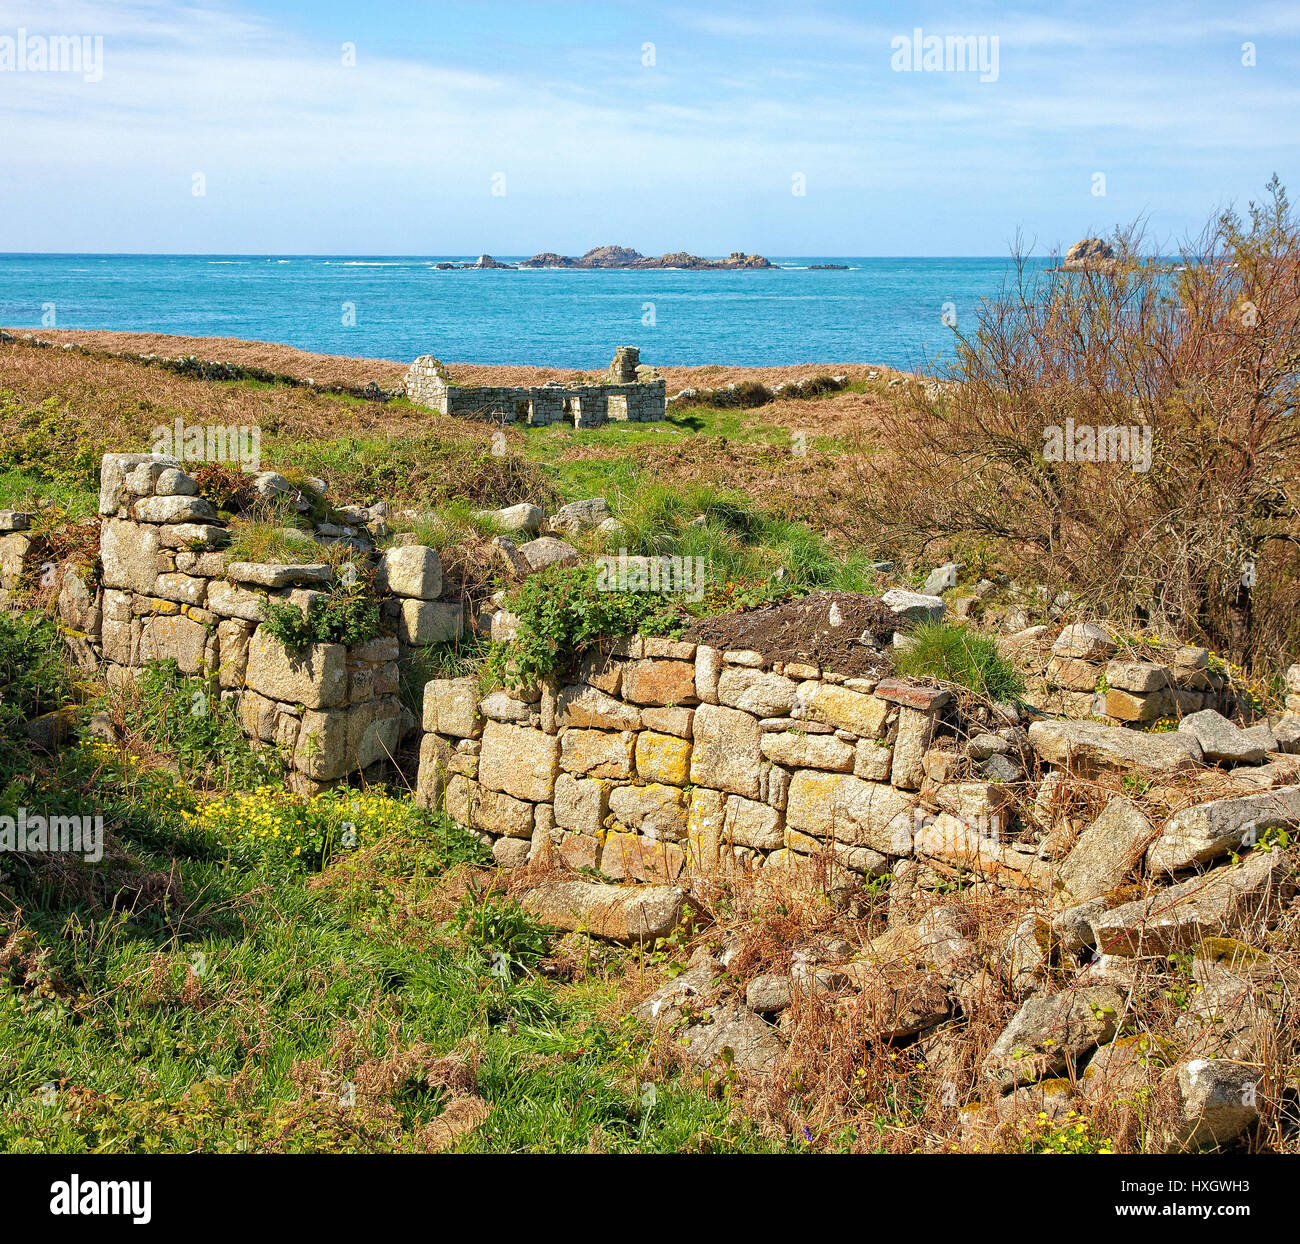 Ruined and deserted village on the now uninhabited island of Samson in the Isles of Scilly UK Stock Photo